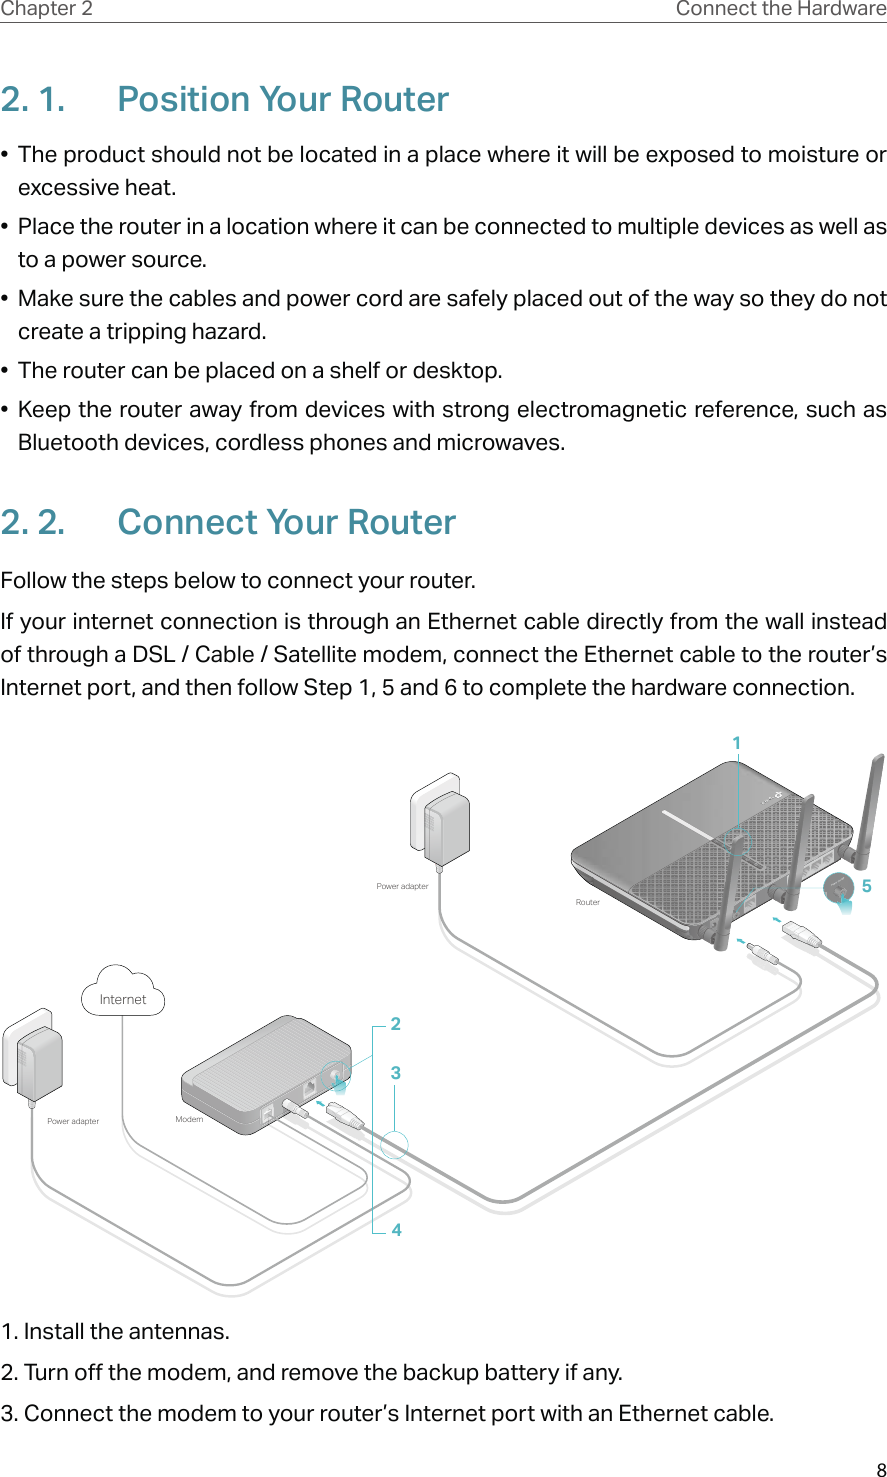 8Chapter 2 Connect the Hardware2. 1.  Position Your Router•  The product should not be located in a place where it will be exposed to moisture or excessive heat.•  Place the router in a location where it can be connected to multiple devices as well as to a power source.•  Make sure the cables and power cord are safely placed out of the way so they do not create a tripping hazard.•  The router can be placed on a shelf or desktop.• Keep the router away from devices with strong electromagnetic reference, such as Bluetooth devices, cordless phones and microwaves.2. 2.  Connect Your RouterFollow the steps below to connect your router.If your internet connection is through an Ethernet cable directly from the wall instead of through a DSL / Cable / Satellite modem, connect the Ethernet cable to the router’s Internet port, and then follow Step 1, 5 and 6 to complete the hardware connection.5ModemPower adapterPower adapterRouter2134Internet1. Install the antennas.2. Turn off the modem, and remove the backup battery if any.3. Connect the modem to your router’s Internet port with an Ethernet cable.